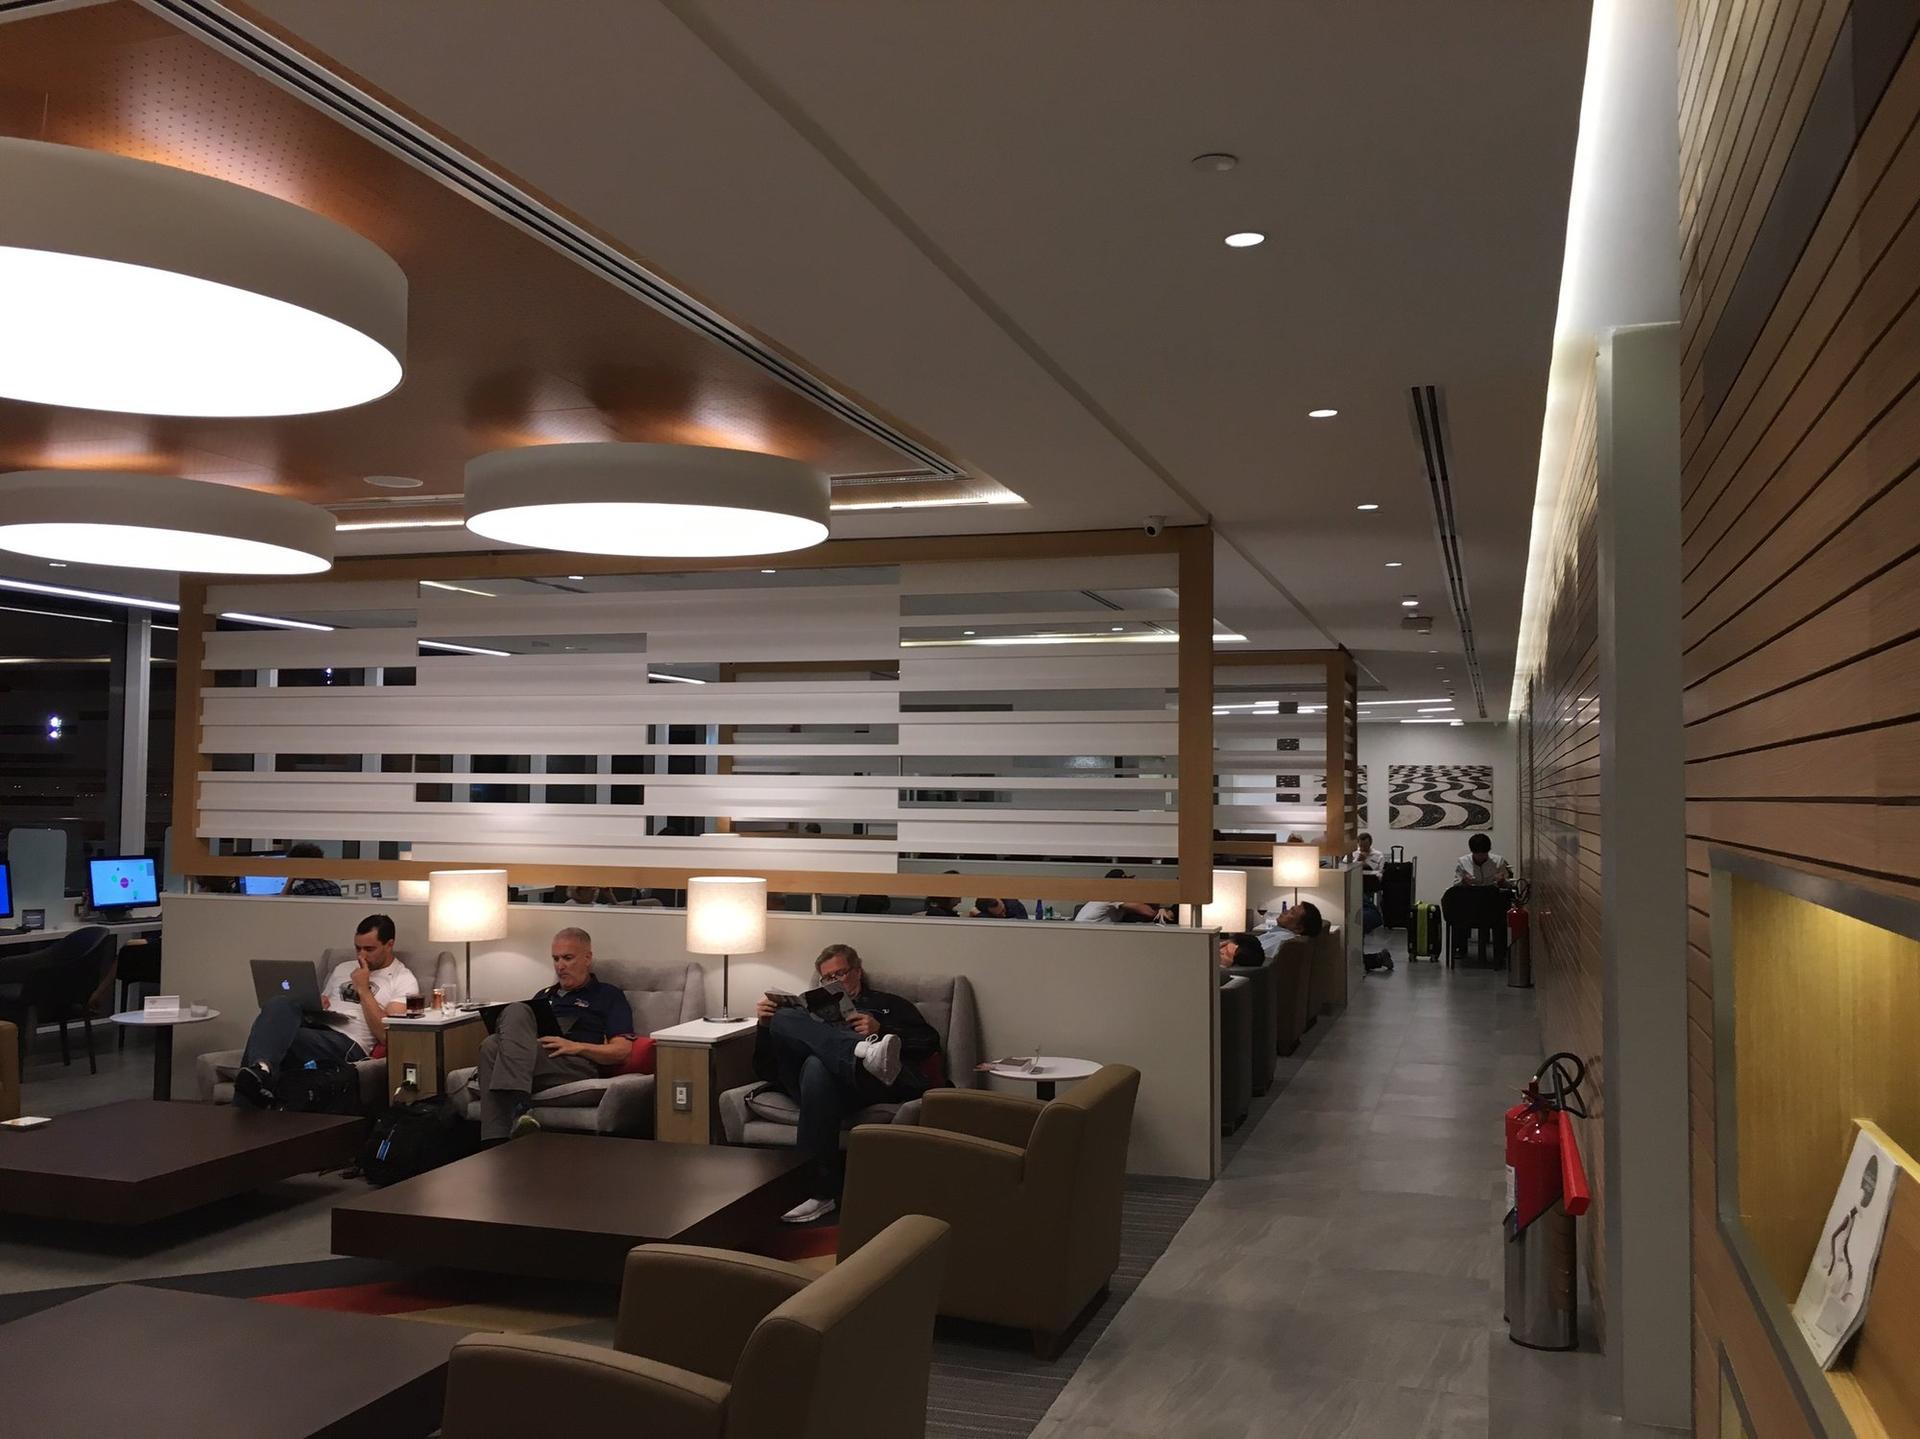 American Airlines Admirals Club image 4 of 6